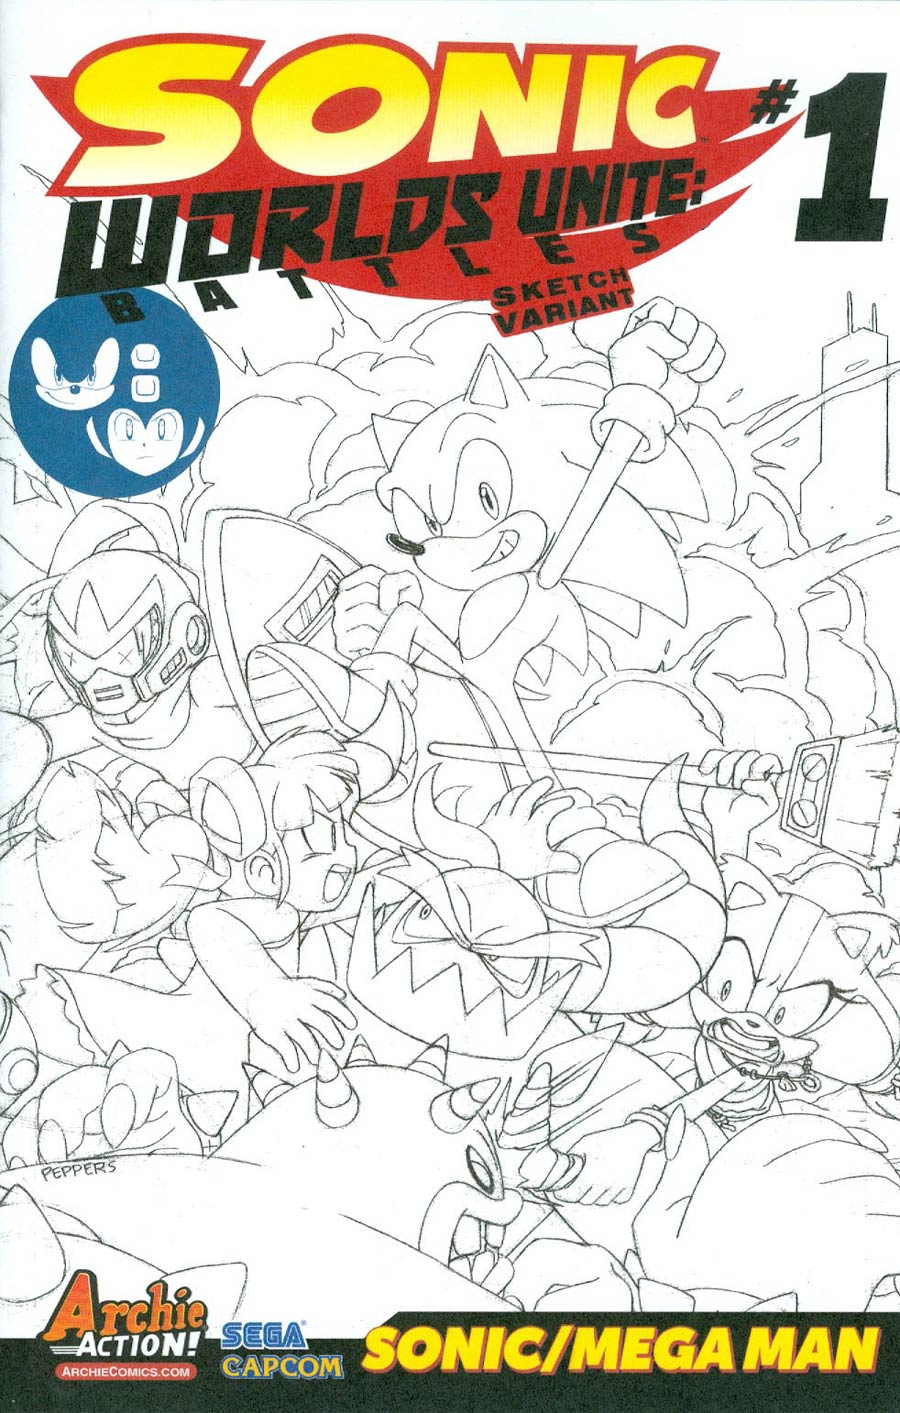 Sonic Worlds Unite Battles #1 Cover B Variant Jamal Peppers Sketch Cover (Worlds Unite Tie-In)